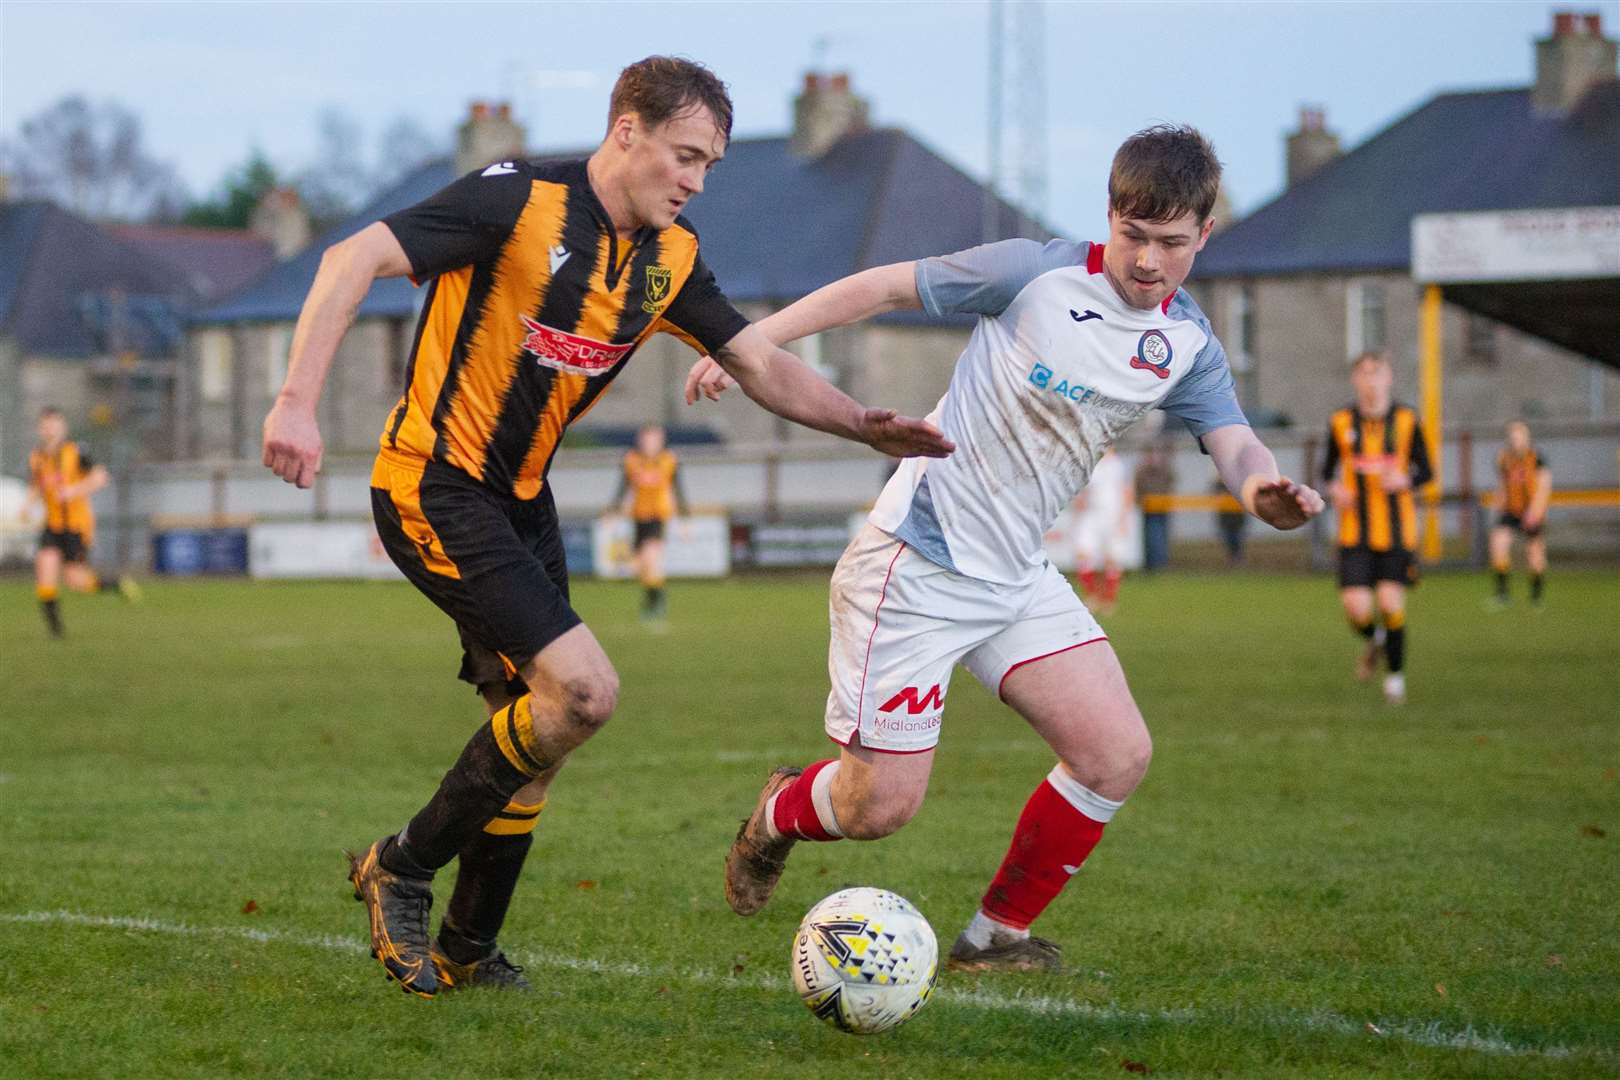 Huntly's Gavin Elphinstone (left) and Turriff's Rhys Clark (right) in action. Picture: Daniel Forsyth..